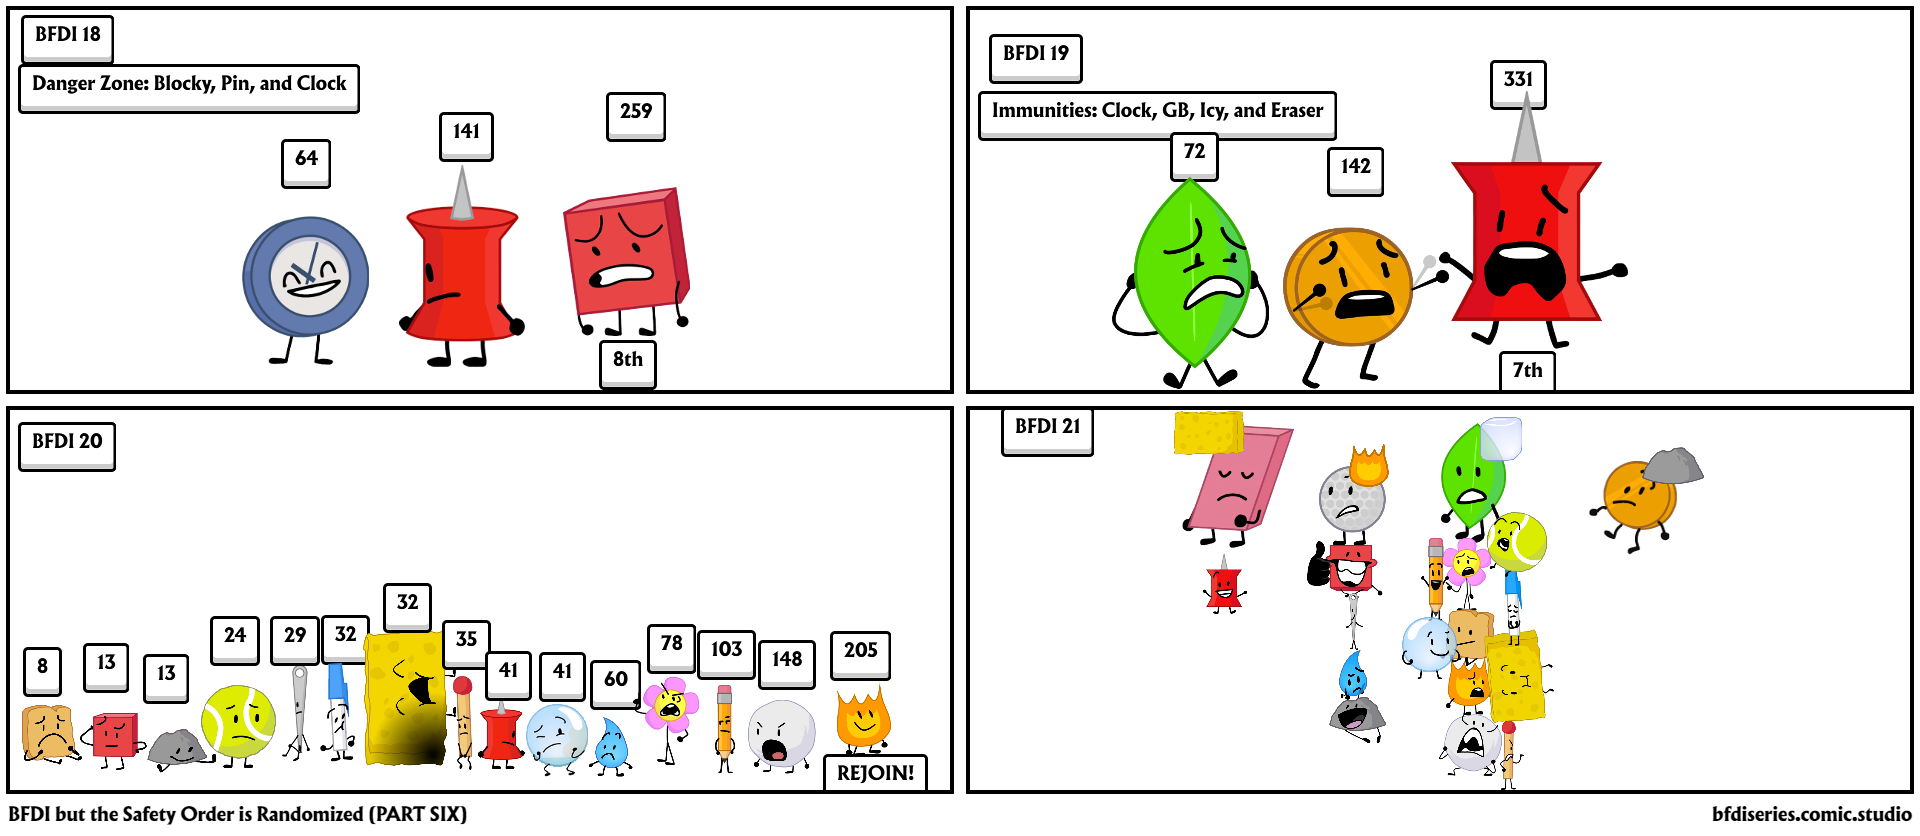 BFDI but the Safety Order is Randomized (PART SIX)